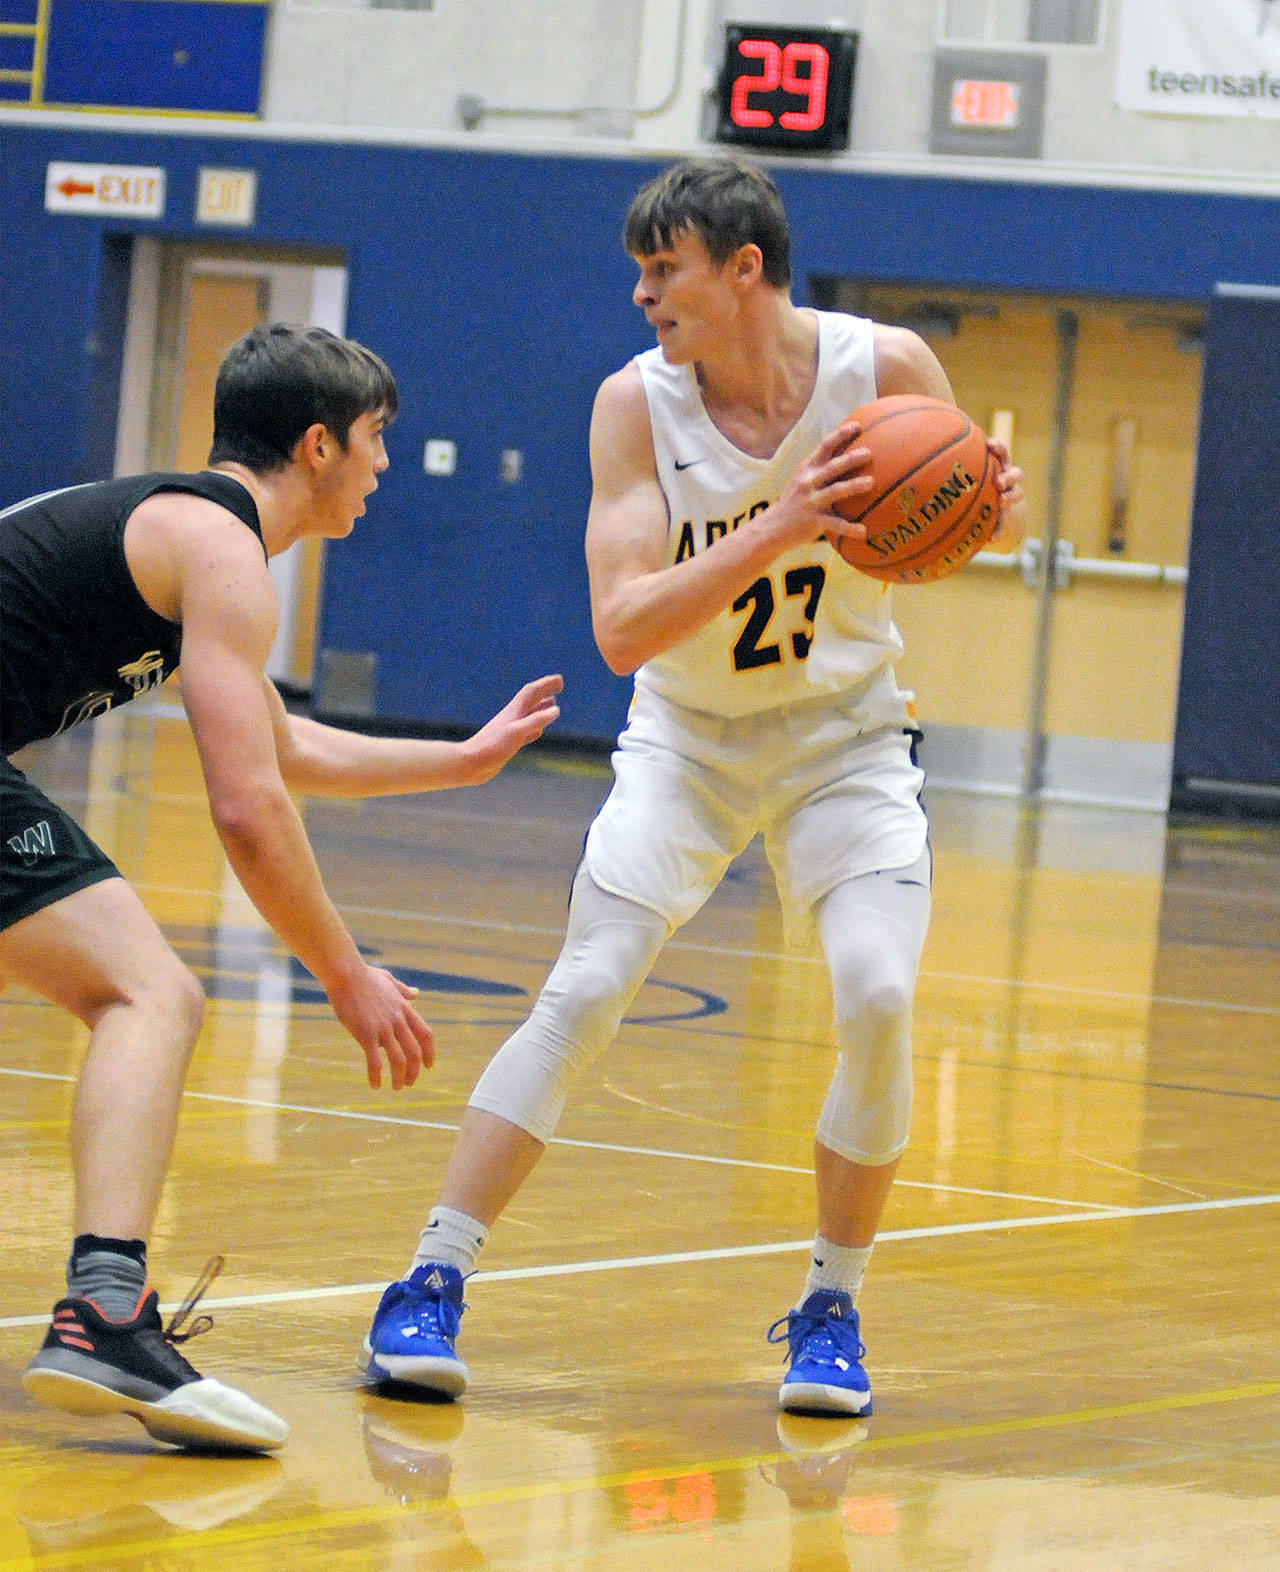 Aberdeen’s Wyatt Johnson, seen here against Woodland on Thursday, was named to the 2A Evergreen All-League Second Team after leading the Bobcats in scoring with 11.5 points per game this season. (Ryan Sparks | Grays Harbor News Group)